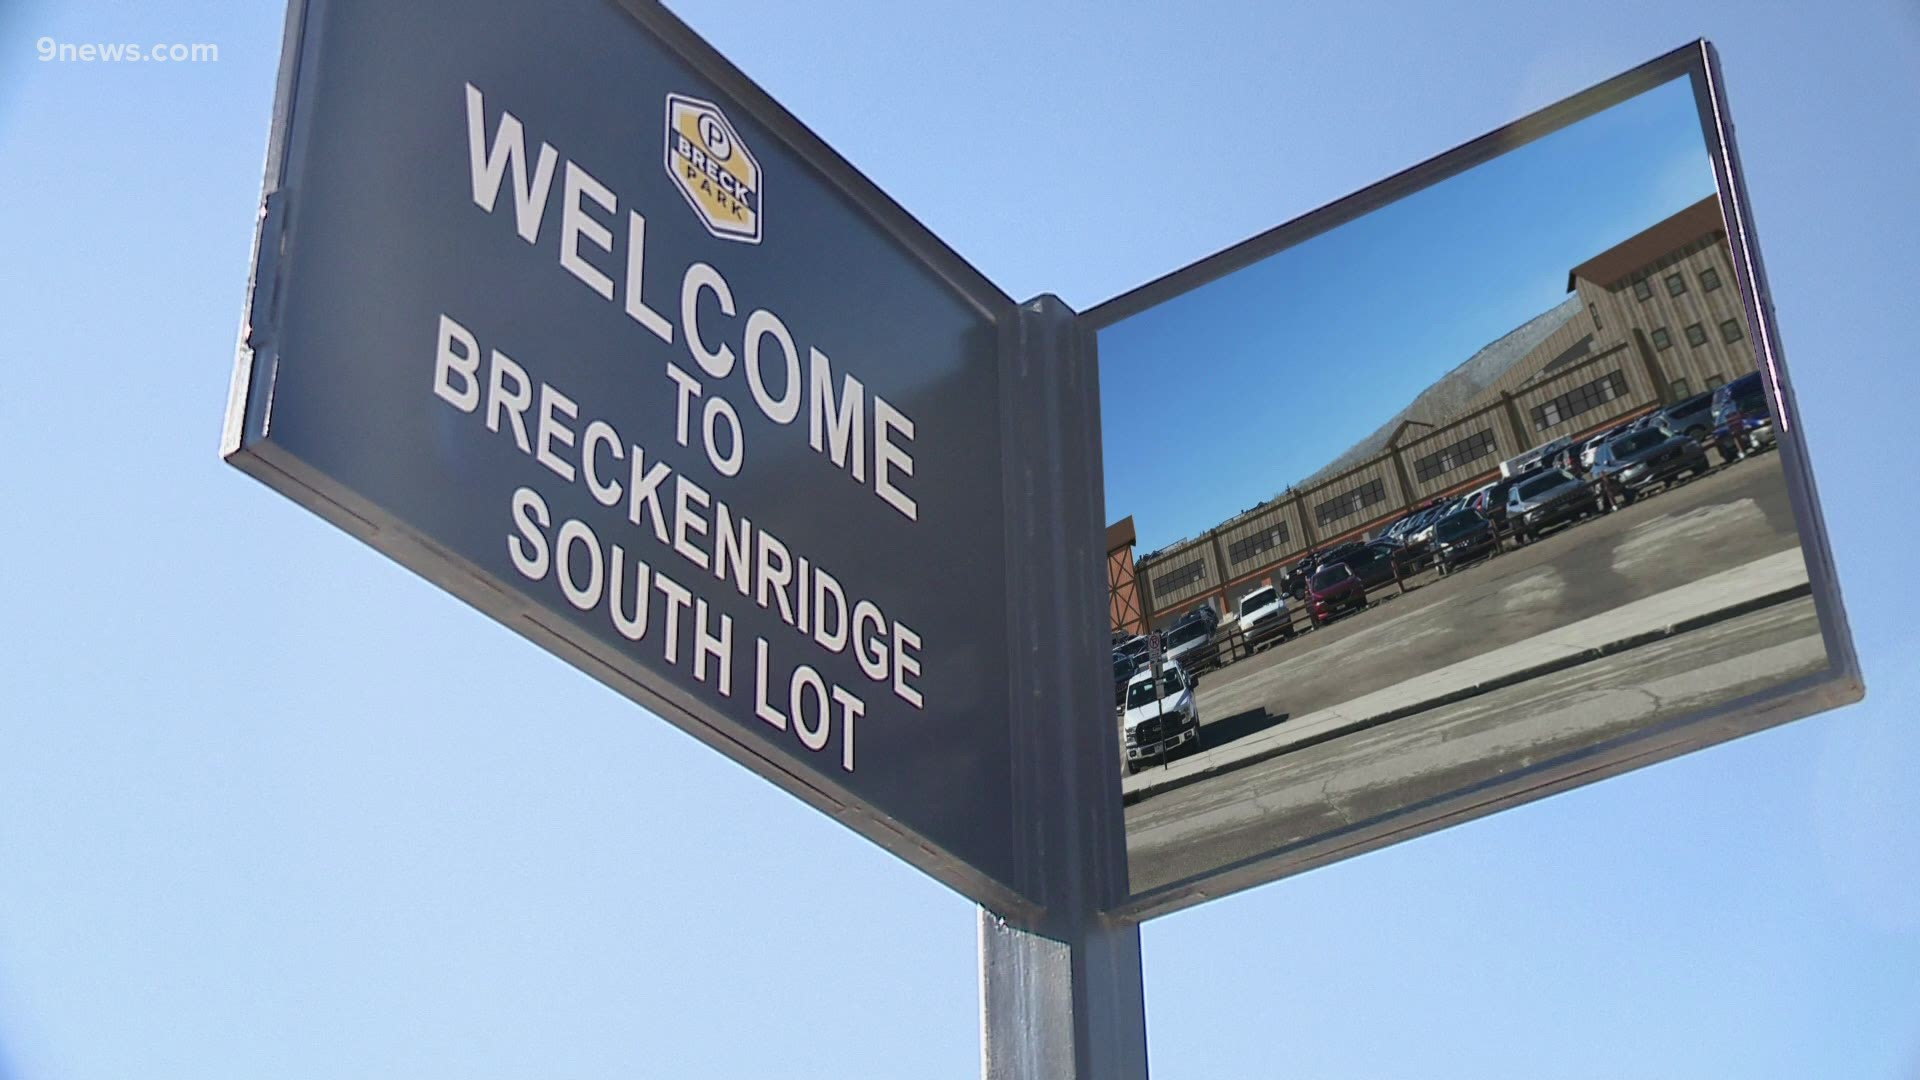 Breckenridge has started work on a $40 million parking garage. Located on the current south gondola lot, it will add 400 new spots and heated sidewalks.